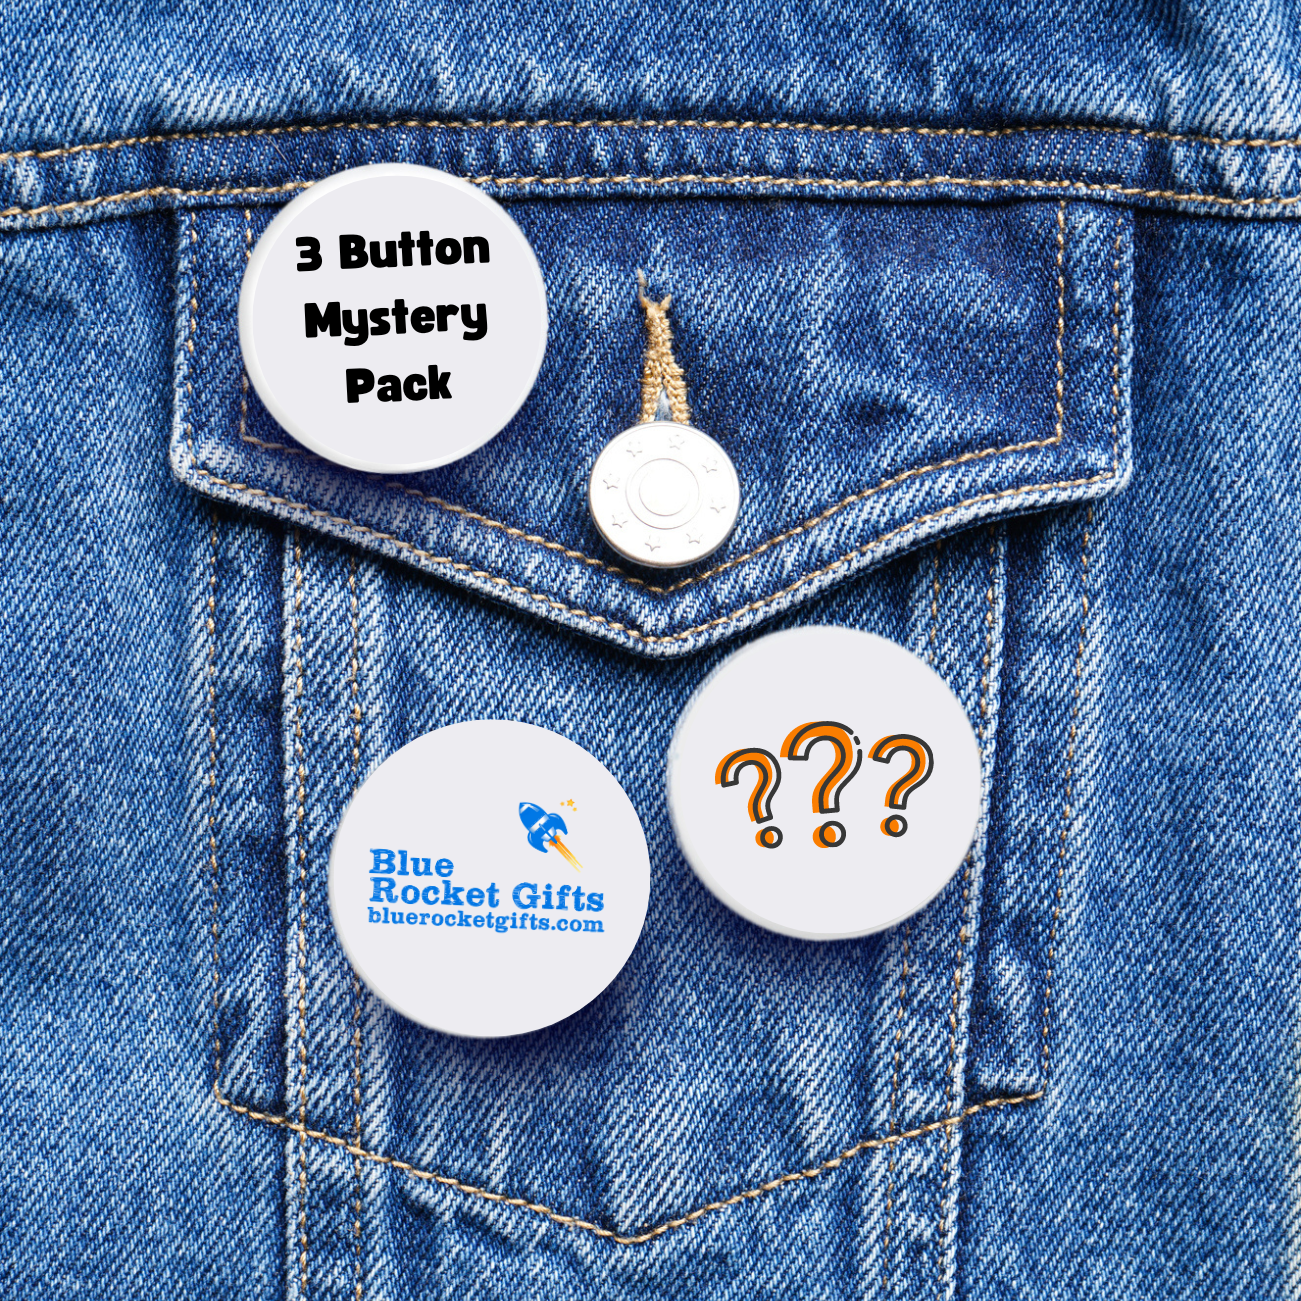 3pcs Funny Button Mystery Pack - Pinback Button 1.5"